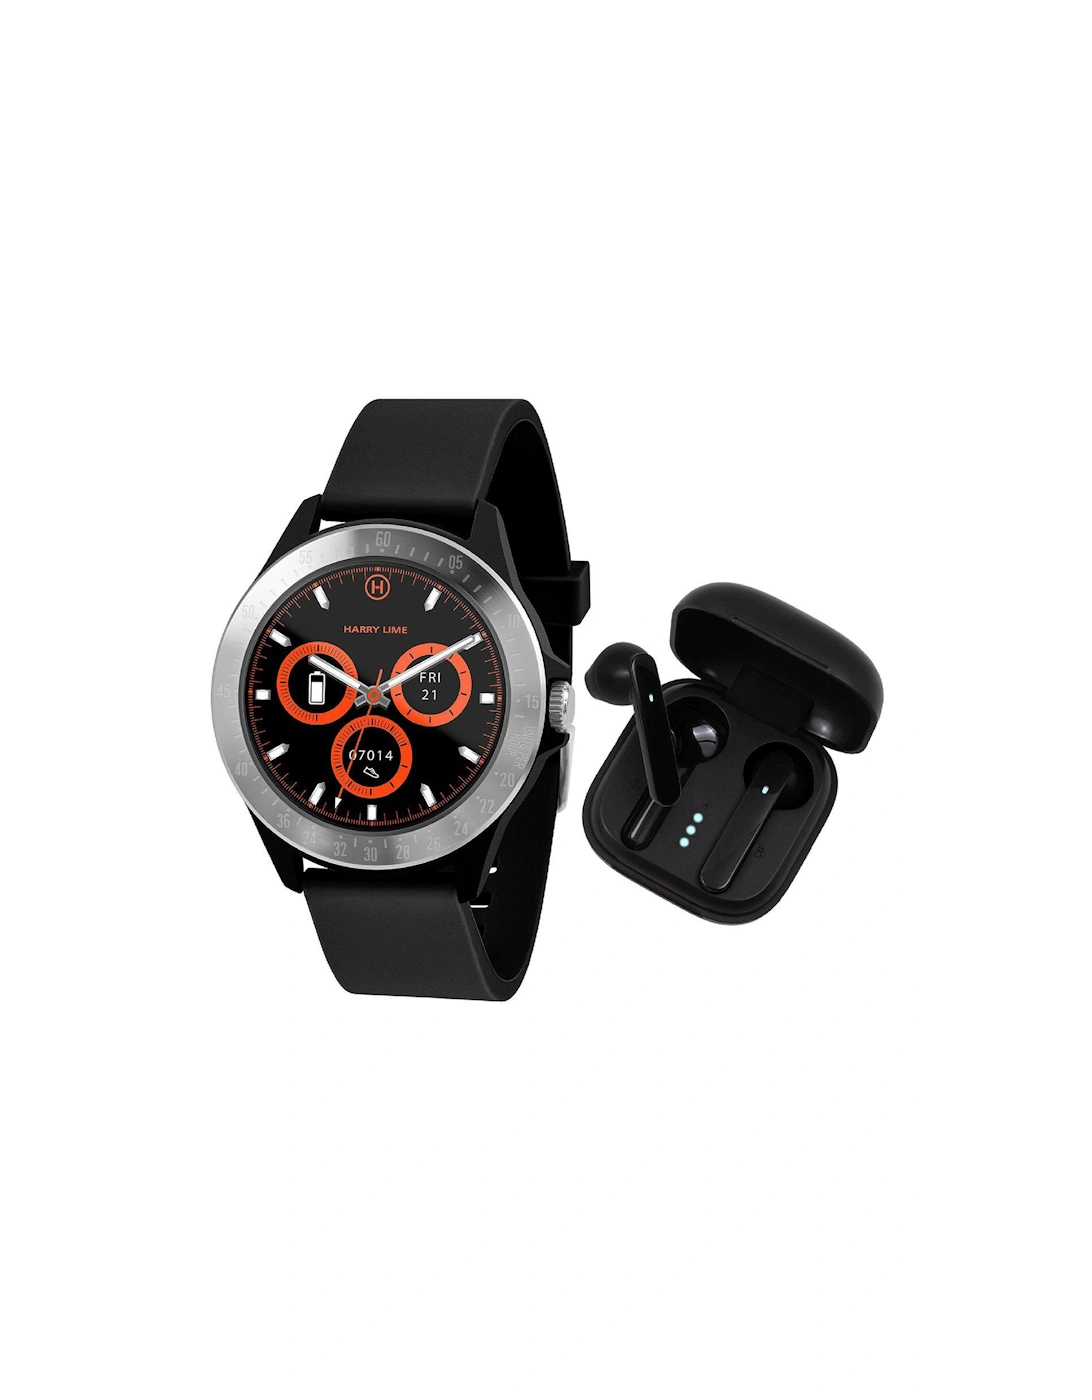 Fashion Smart Watch in Black Featuring Black True Wireless Stereo Earbuds in Charging Case HA07-2001-TWS, 3 of 2